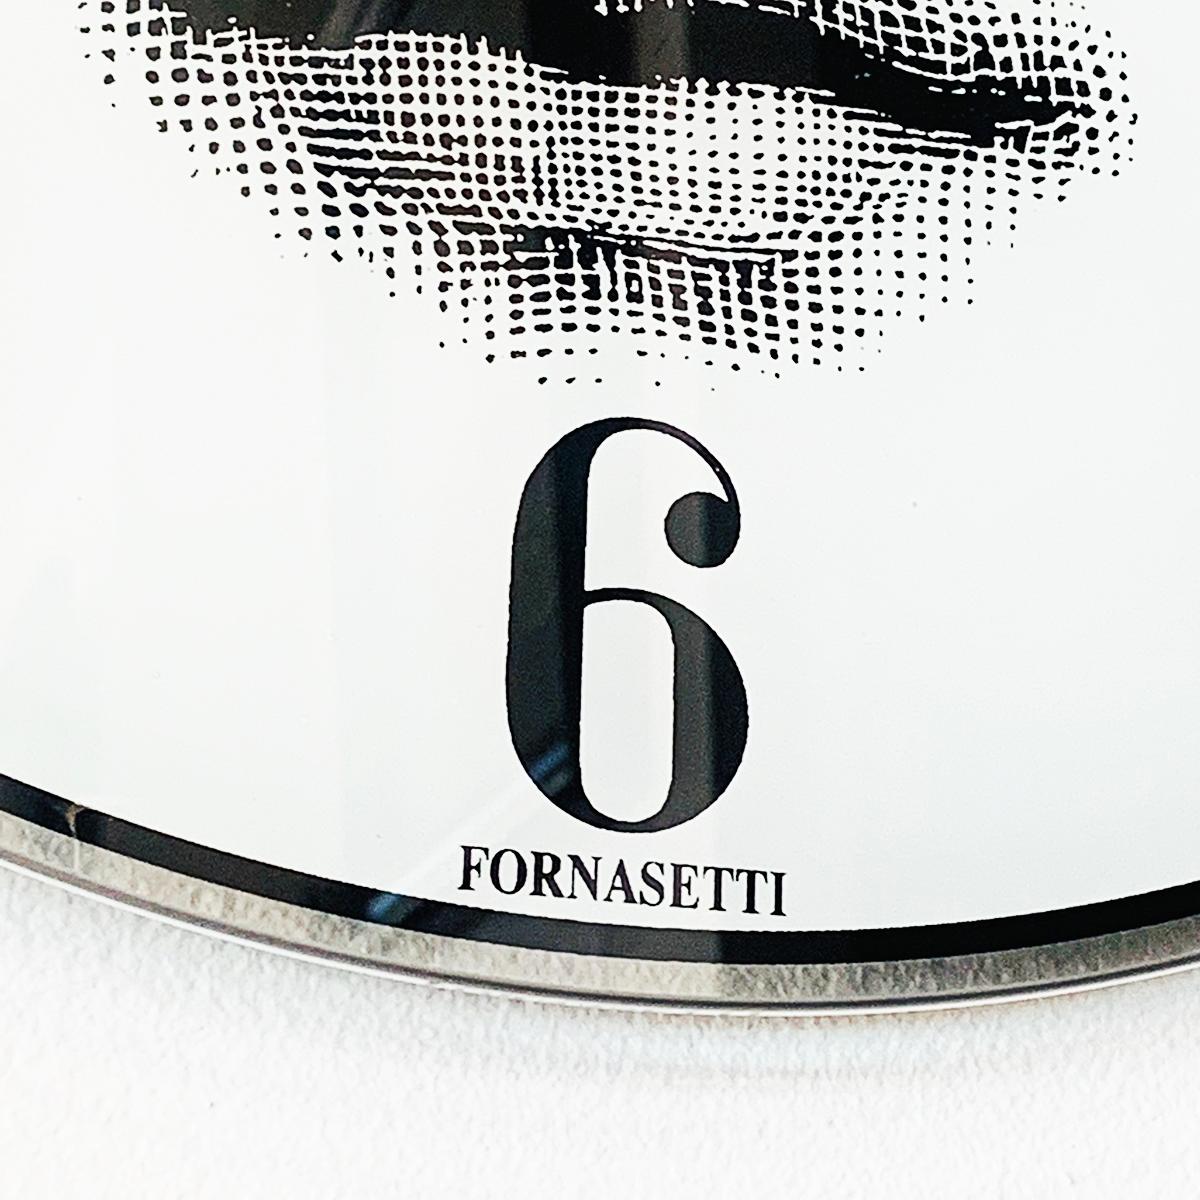 Midcentury Fornasetti wall clock with the face of 19th century operatic soprano Lina Cavalieri, Arabic Numerals, and “FORNASETTI” below the 6 position, all in black with white background. Solid glass face with filigree hands. Quartz/battery marked